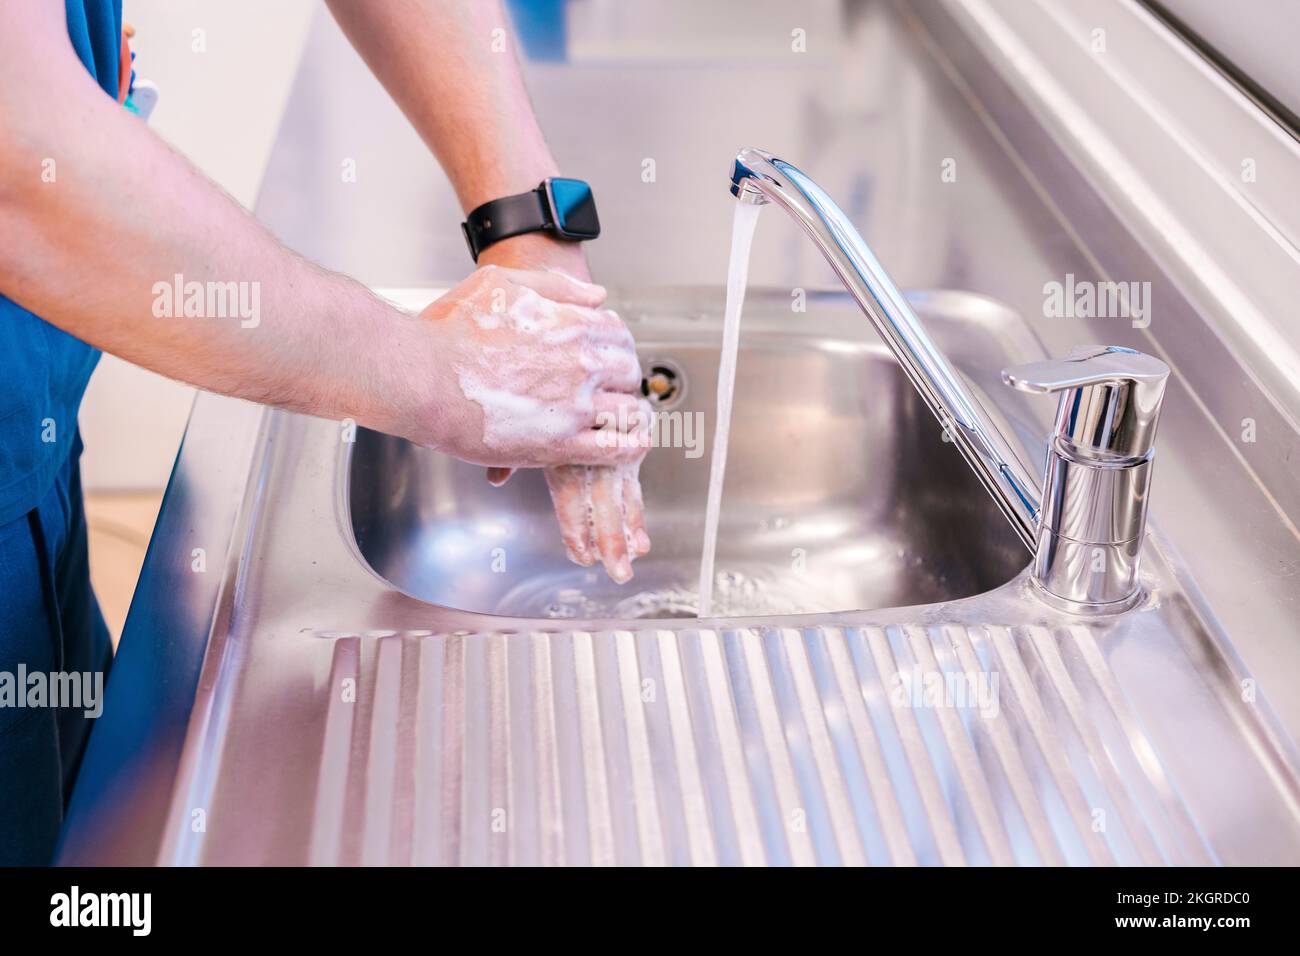 Doctor washing hands with water in sink at hospital Stock Photo